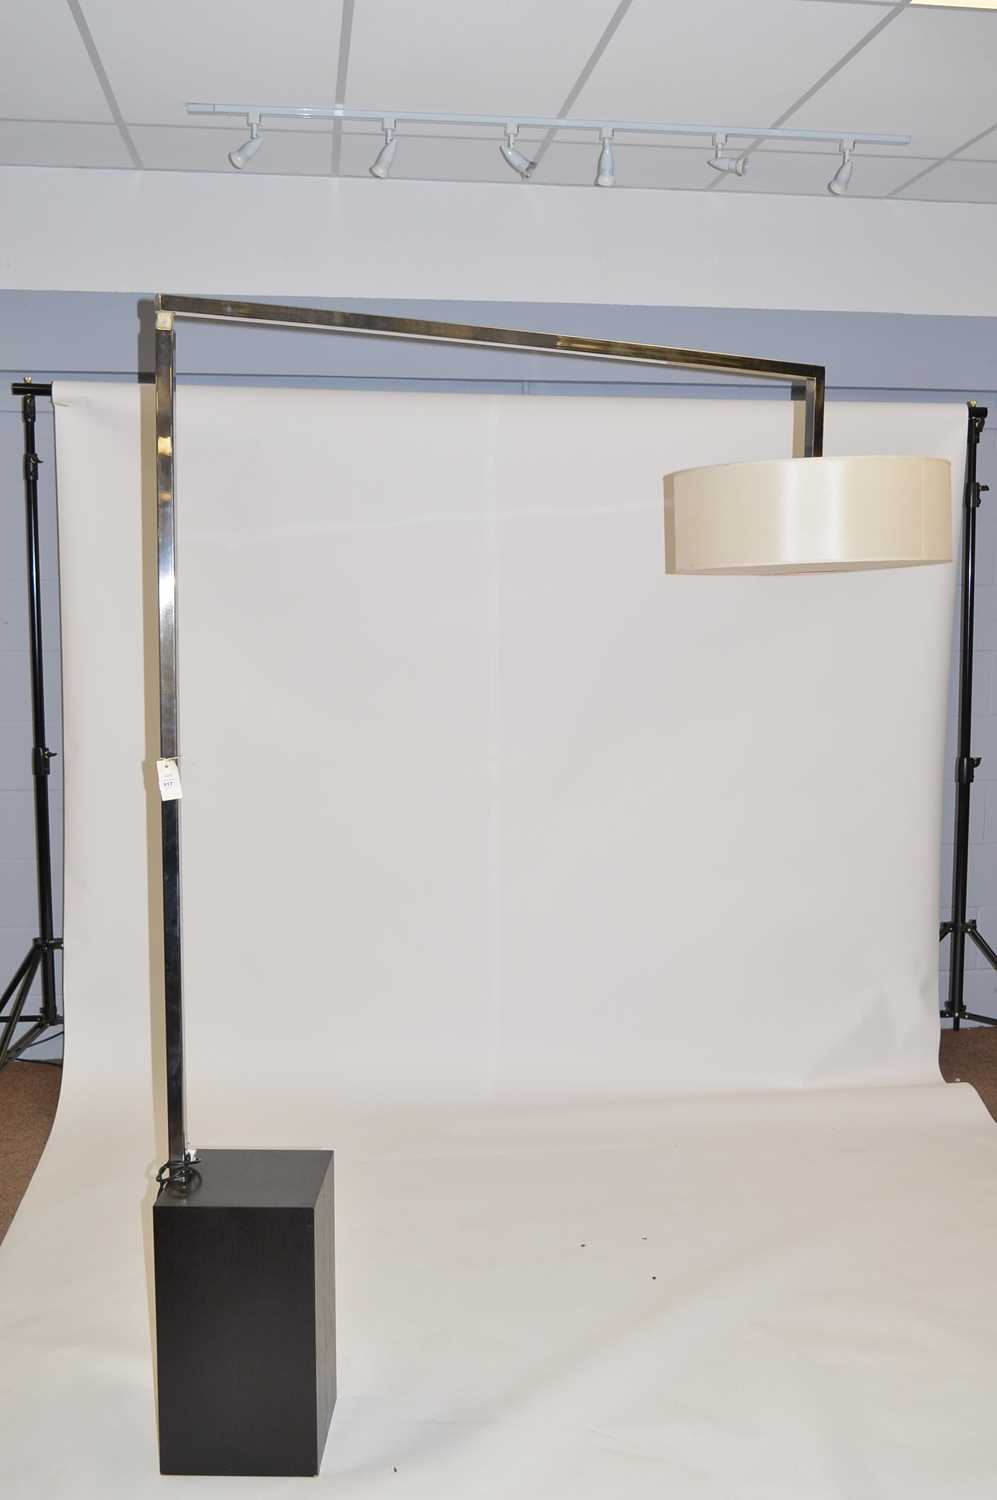 Lot 517 - Modenature Move Inox floor lamp supplied for an early project by Fiona Barratt Interiors.